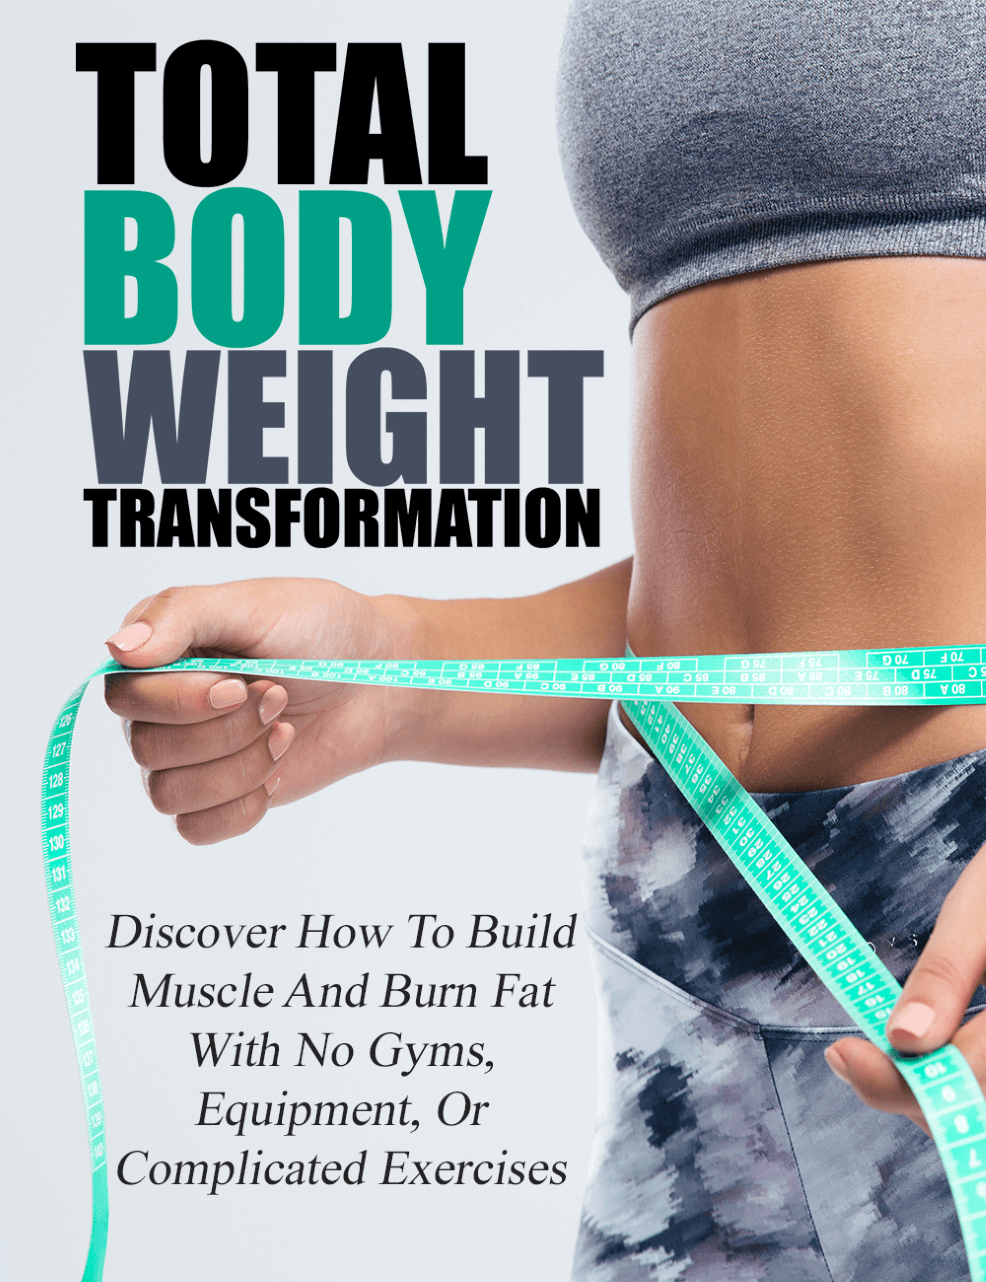 Total Body Weight Transformation